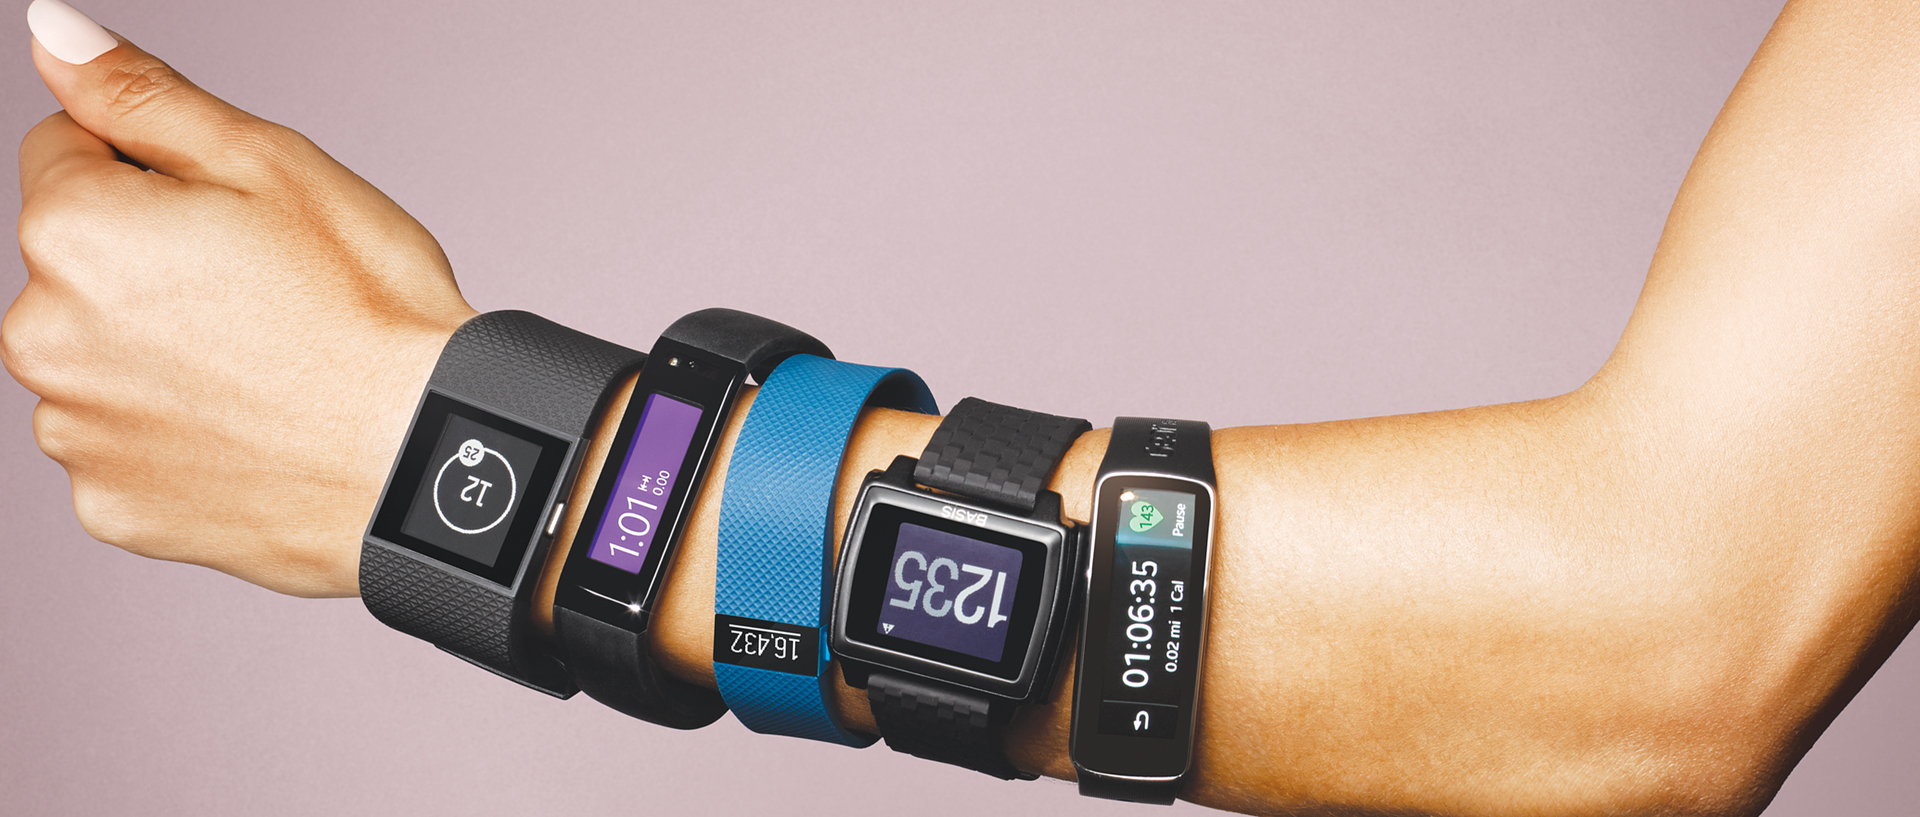 Gecomprimeerd pit Westers Are Expensive Fitness Trackers Worth It? - On Check by PriceCheck